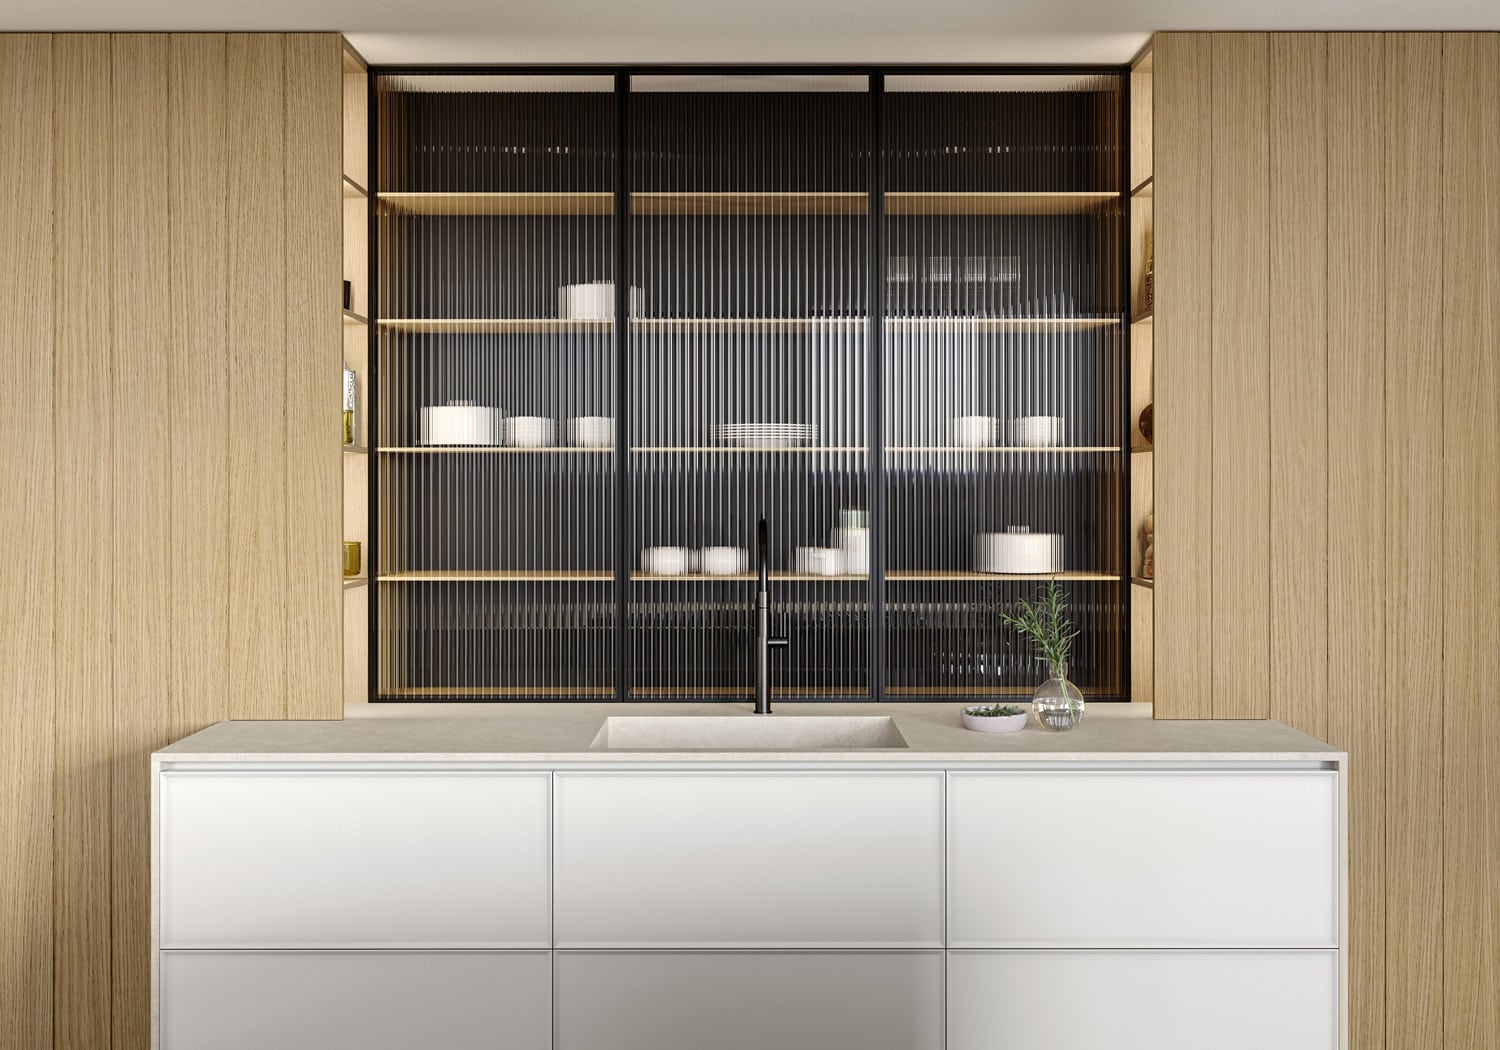 The ribbed glass panel with black aluminum frame breaks the continuity of the slatted oak wood surfaces, providing a peek inside the hidden pantry. 